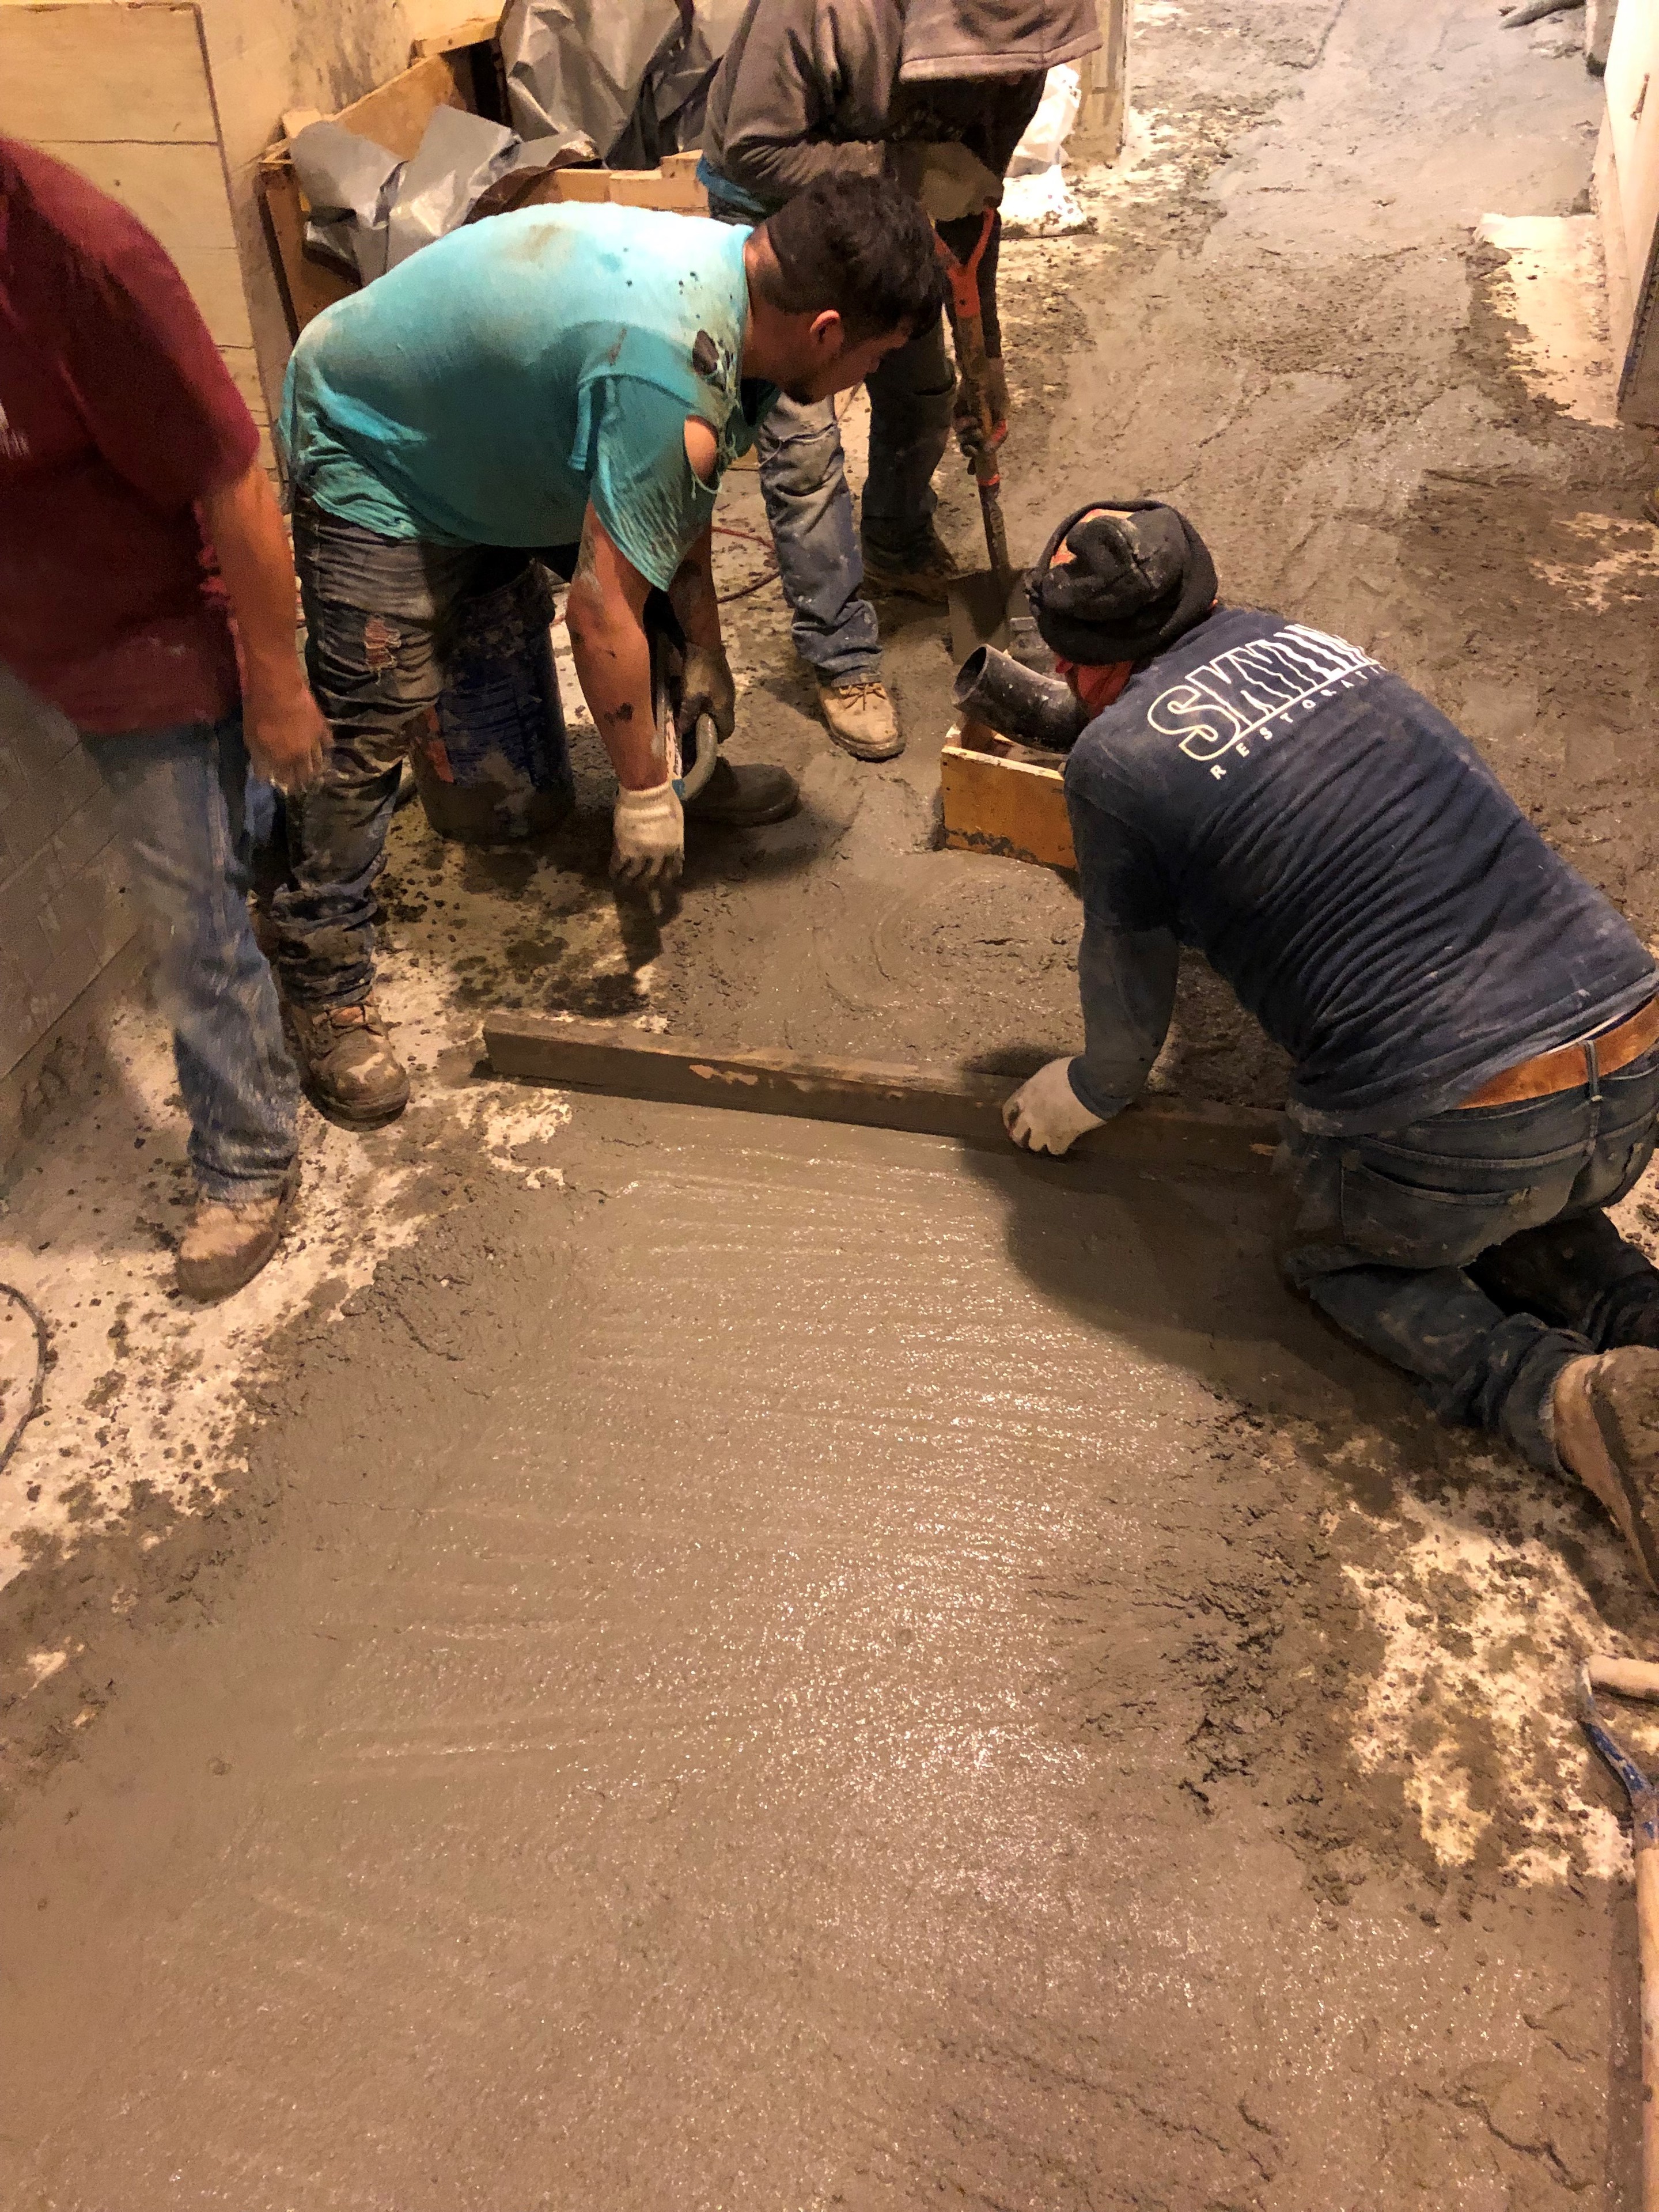 PSP finishes the job: LEVELINE 15, a self-leveling underlayment from PSP, was applied to the concrete basement slab to ensure a perfectly level surface for the final layer of ceramic tiles.